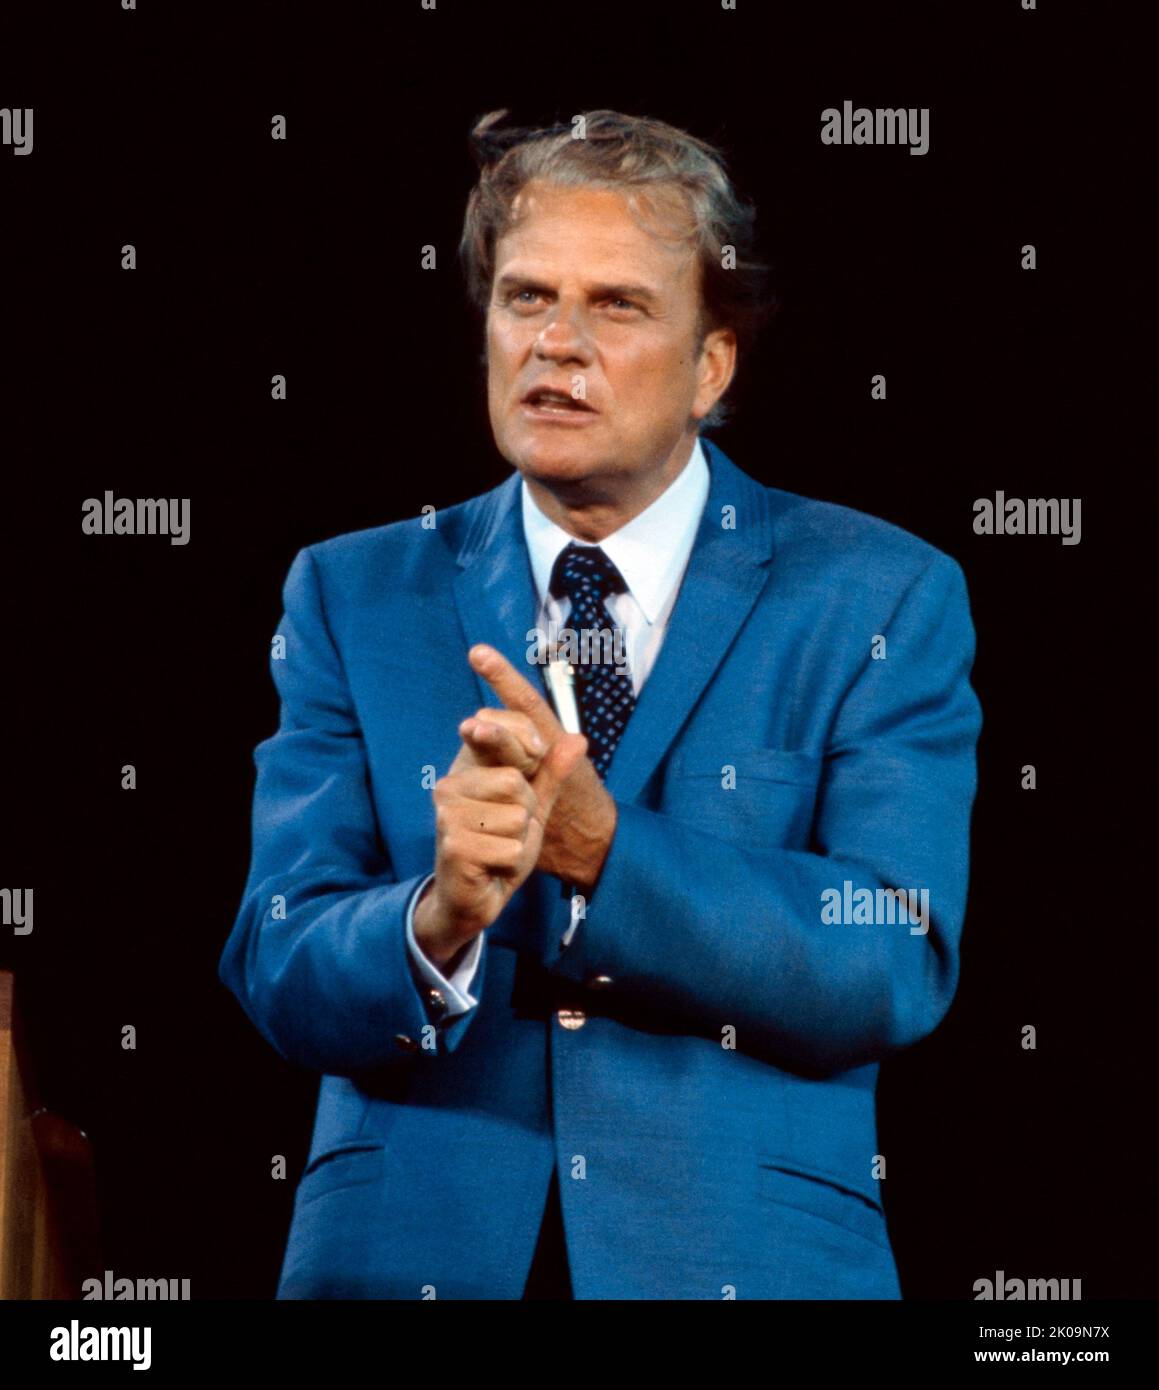 William Franklin Graham Jr. (November 7, 1918 - February 21, 2018) was an American evangelist, a prominent evangelical Christian figure, and an ordained Southern Baptist minister who became well known internationally in the late 1940s. One of his biographers has placed him 'among the most influential Christian leaders' of the 20th century Stock Photo